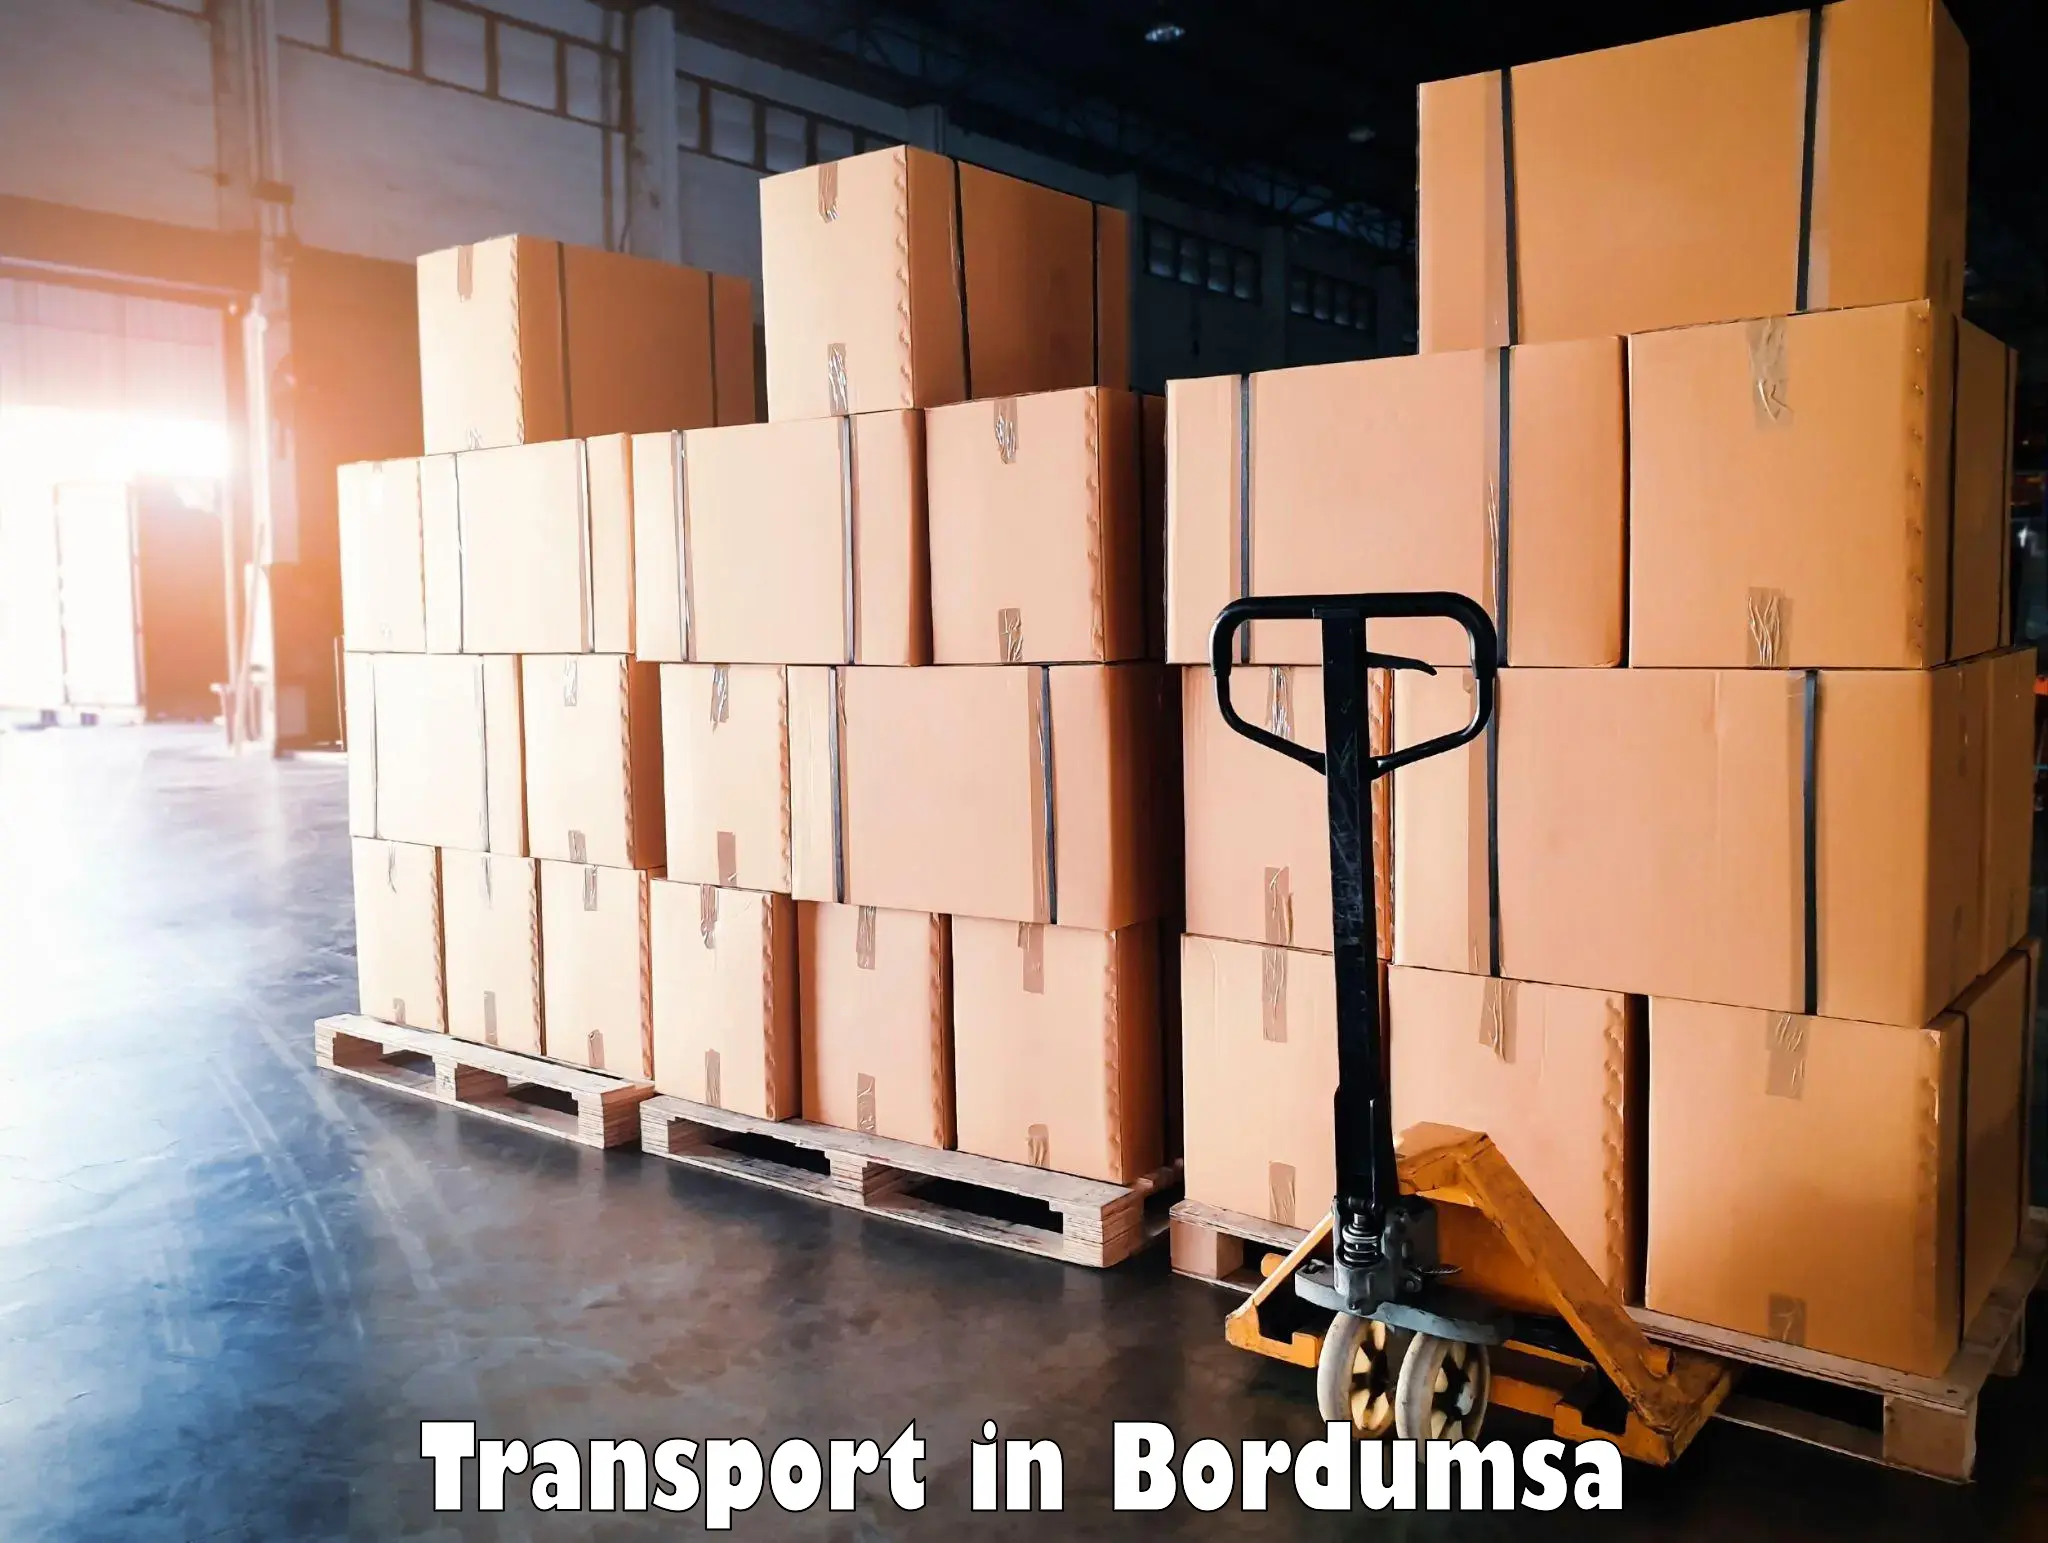 Luggage transport services in Bordumsa